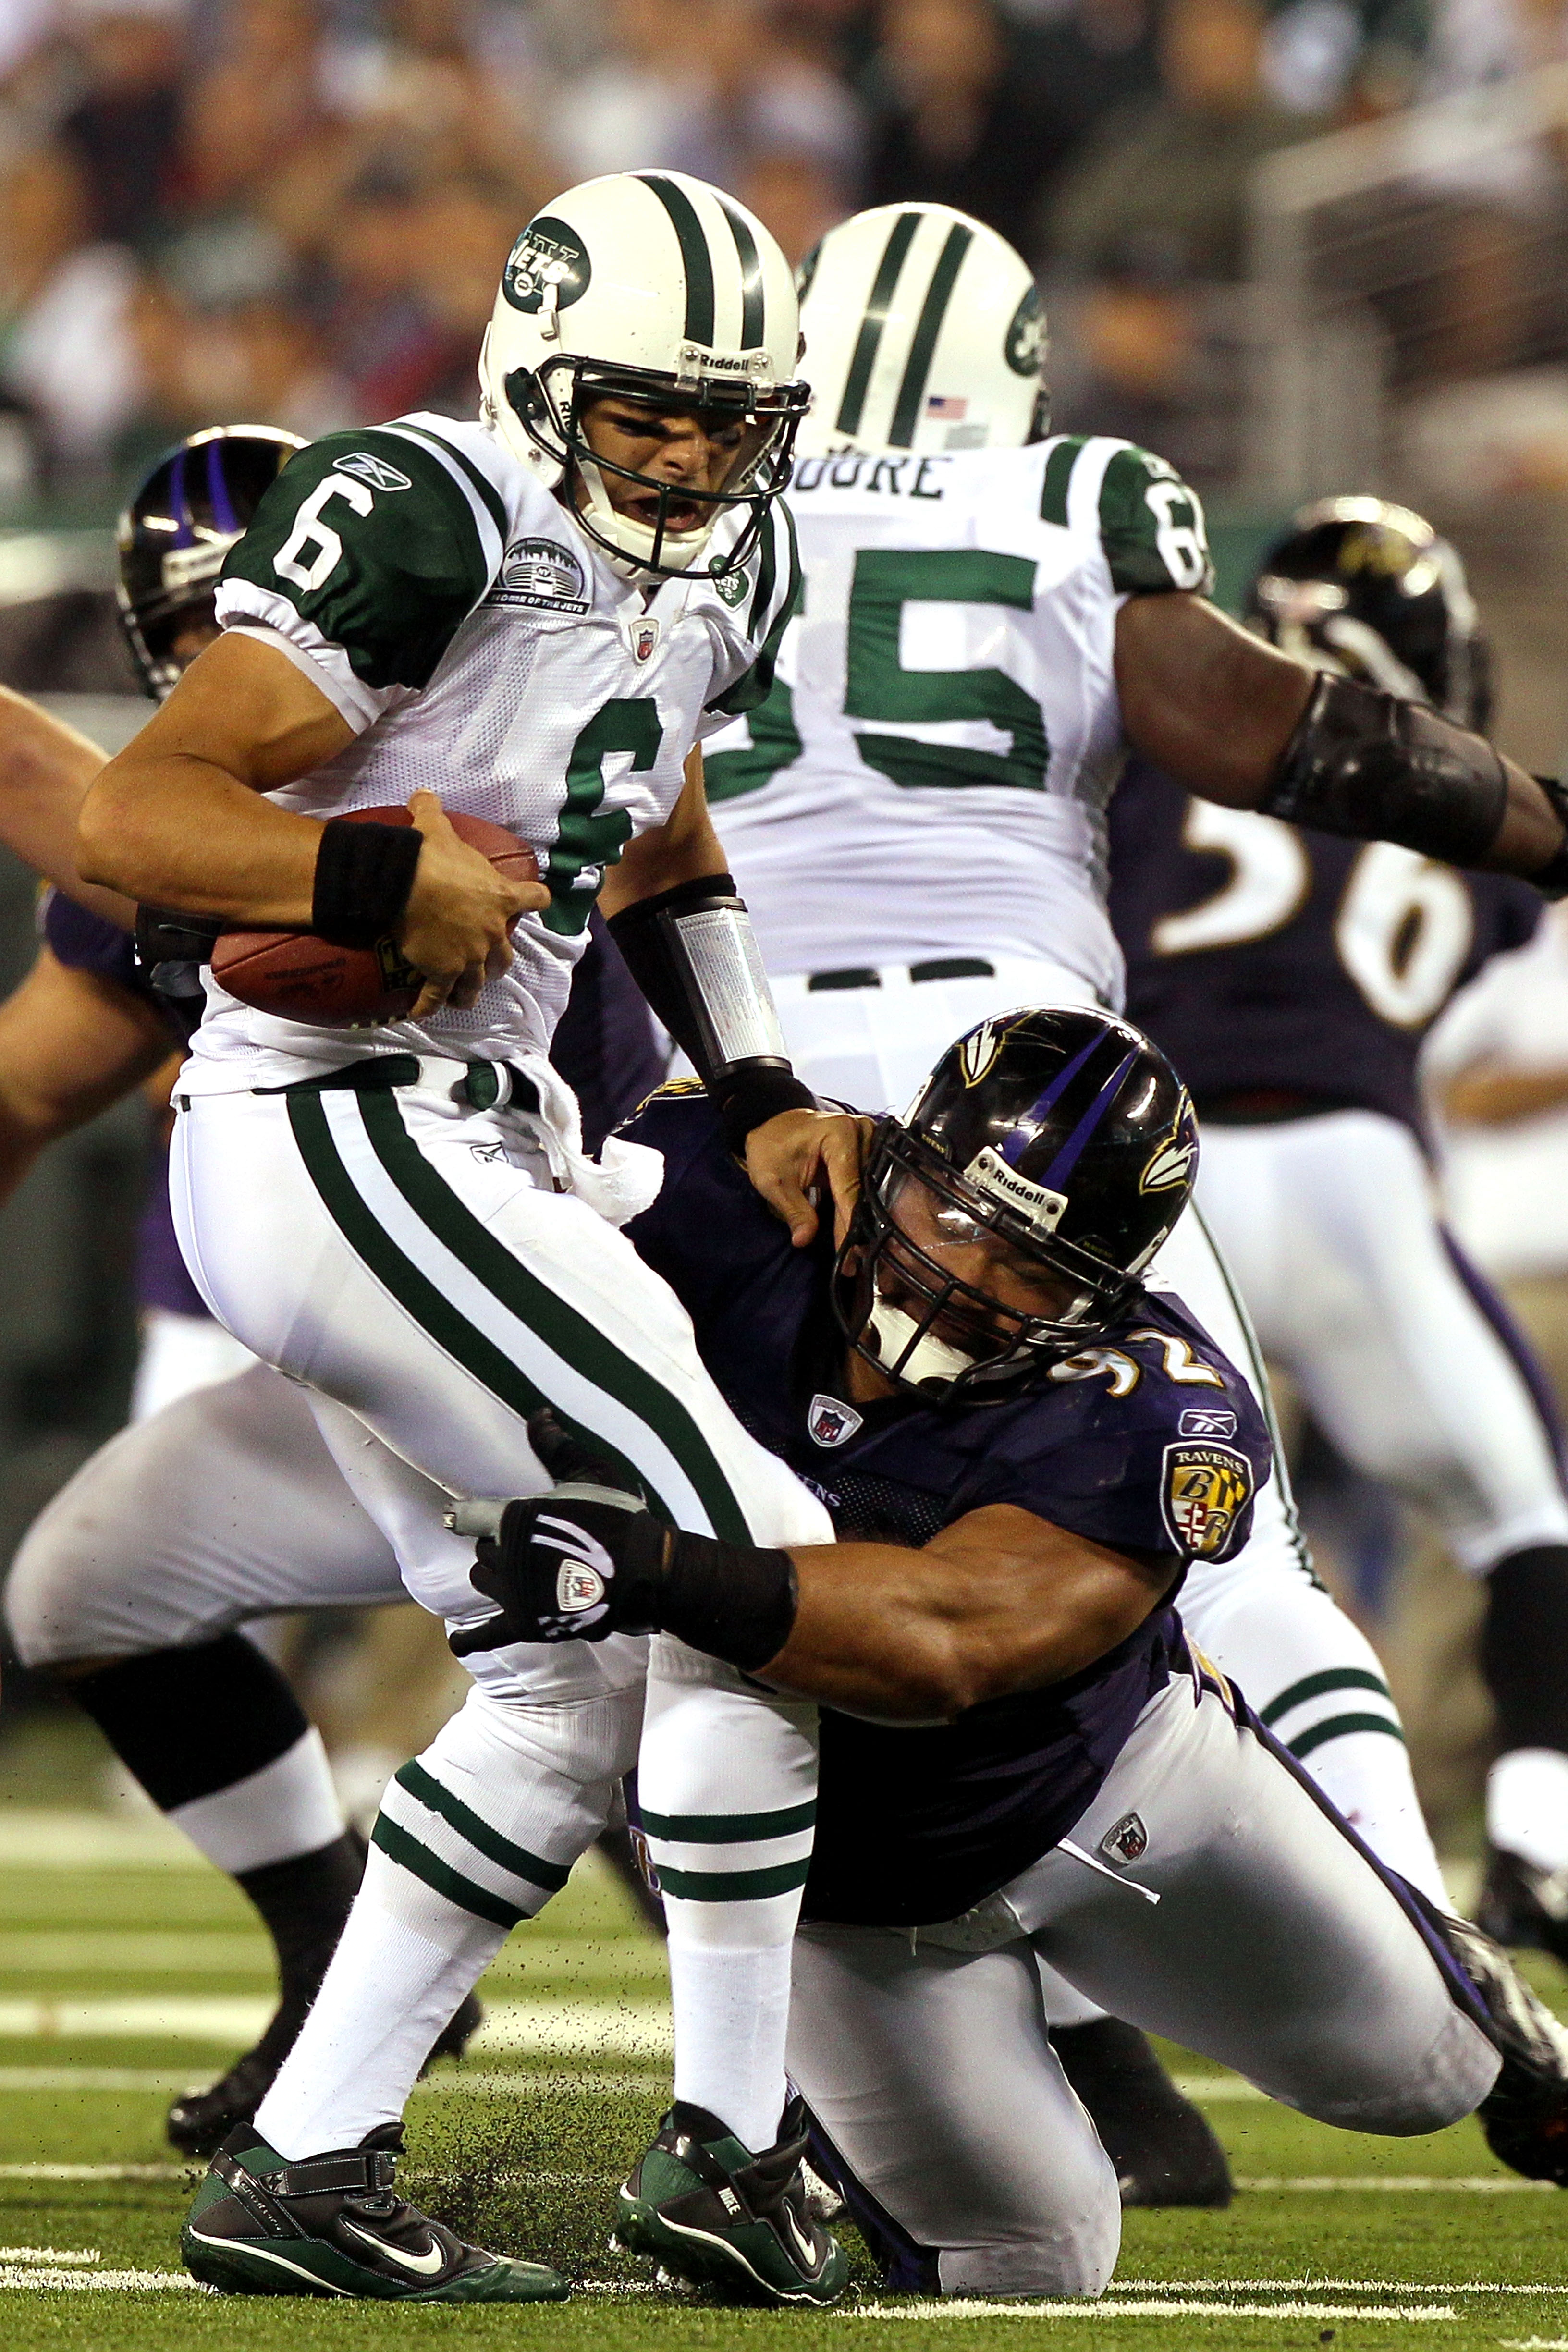 EAST RUTHERFORD, NJ - SEPTEMBER 13:  Mark Sanchez #6 of the New York Jets gets sacked by Haloti Ngata #92 of the Baltimore Ravens during their home opener at the New Meadowlands Stadium on September 13, 2010 in East Rutherford, New Jersey.  (Photo by Jim 